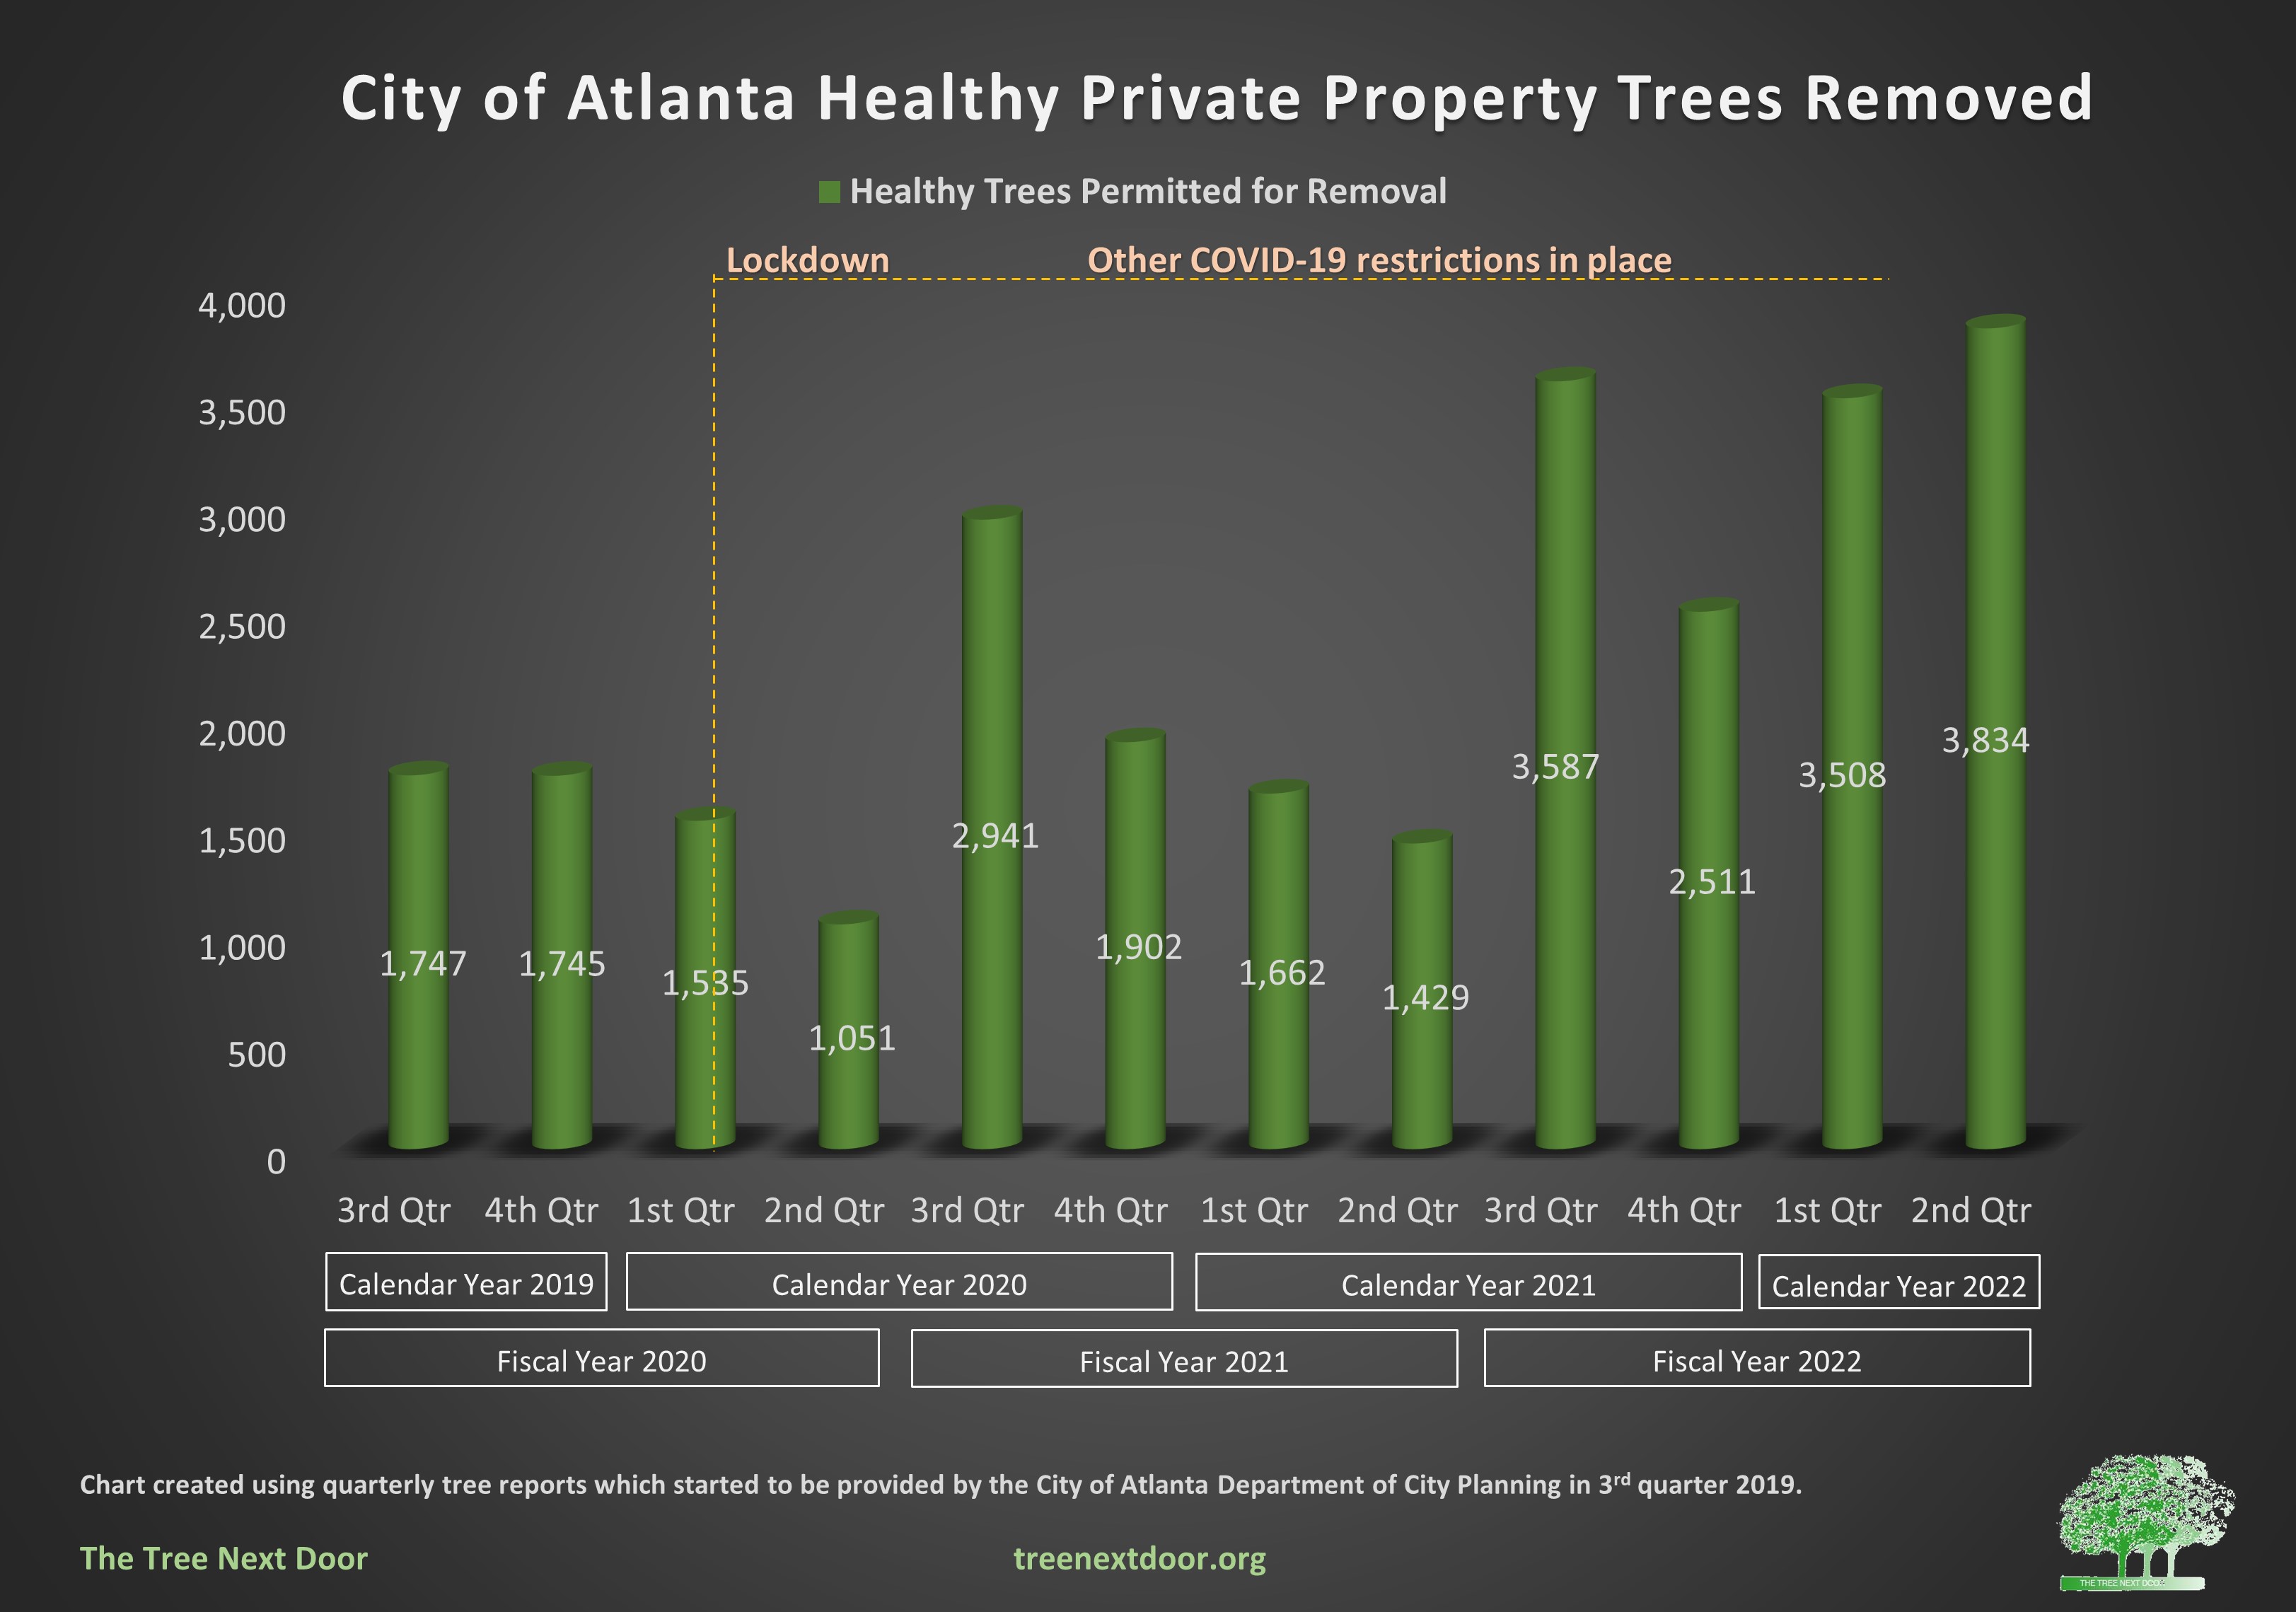 healthy trees removed by quarter